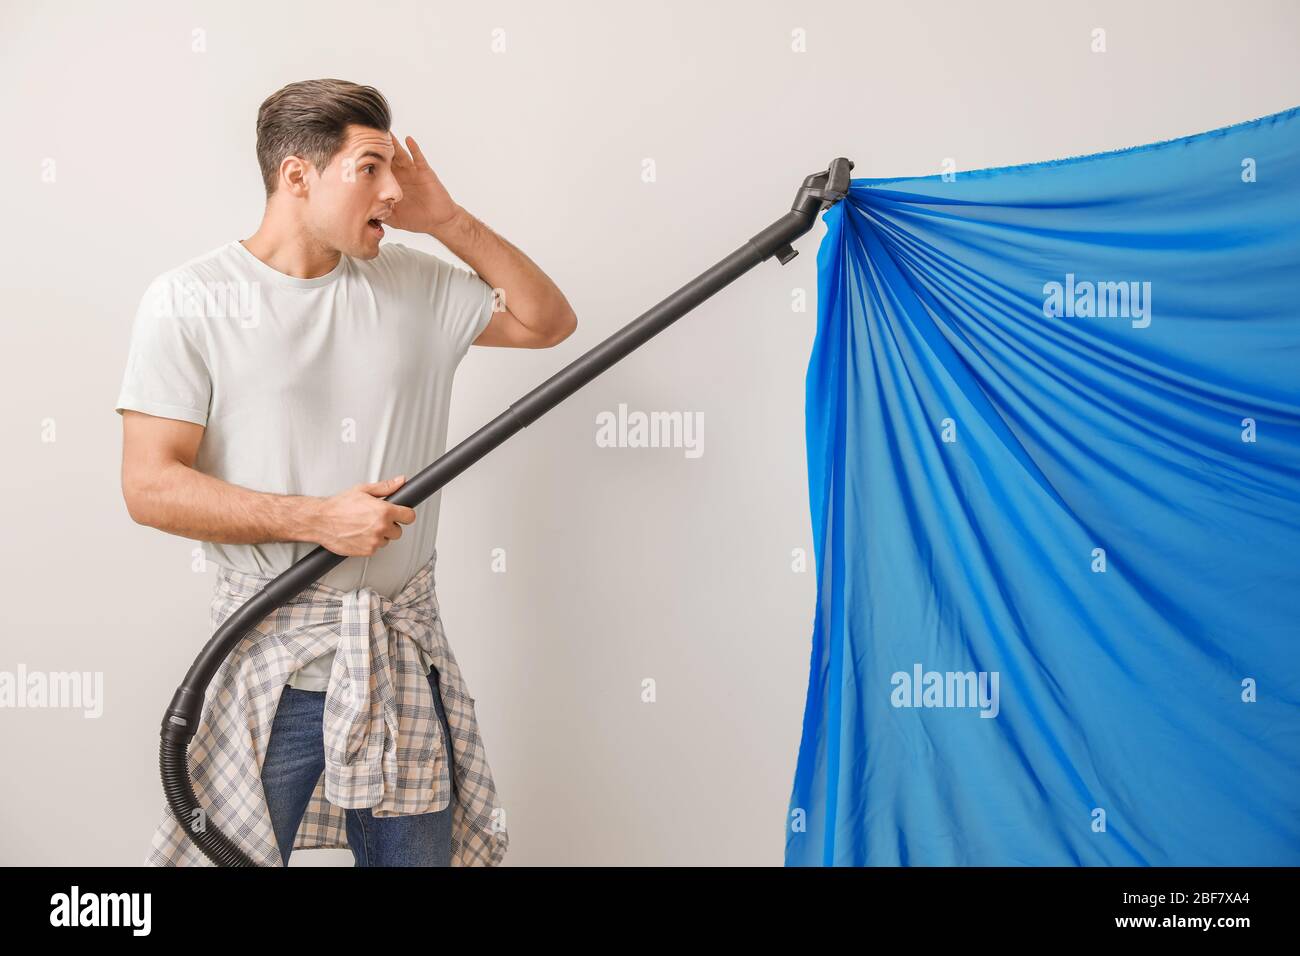 Afraid Young Man With Sucked Into Vacuum Cleaner Curtain Against